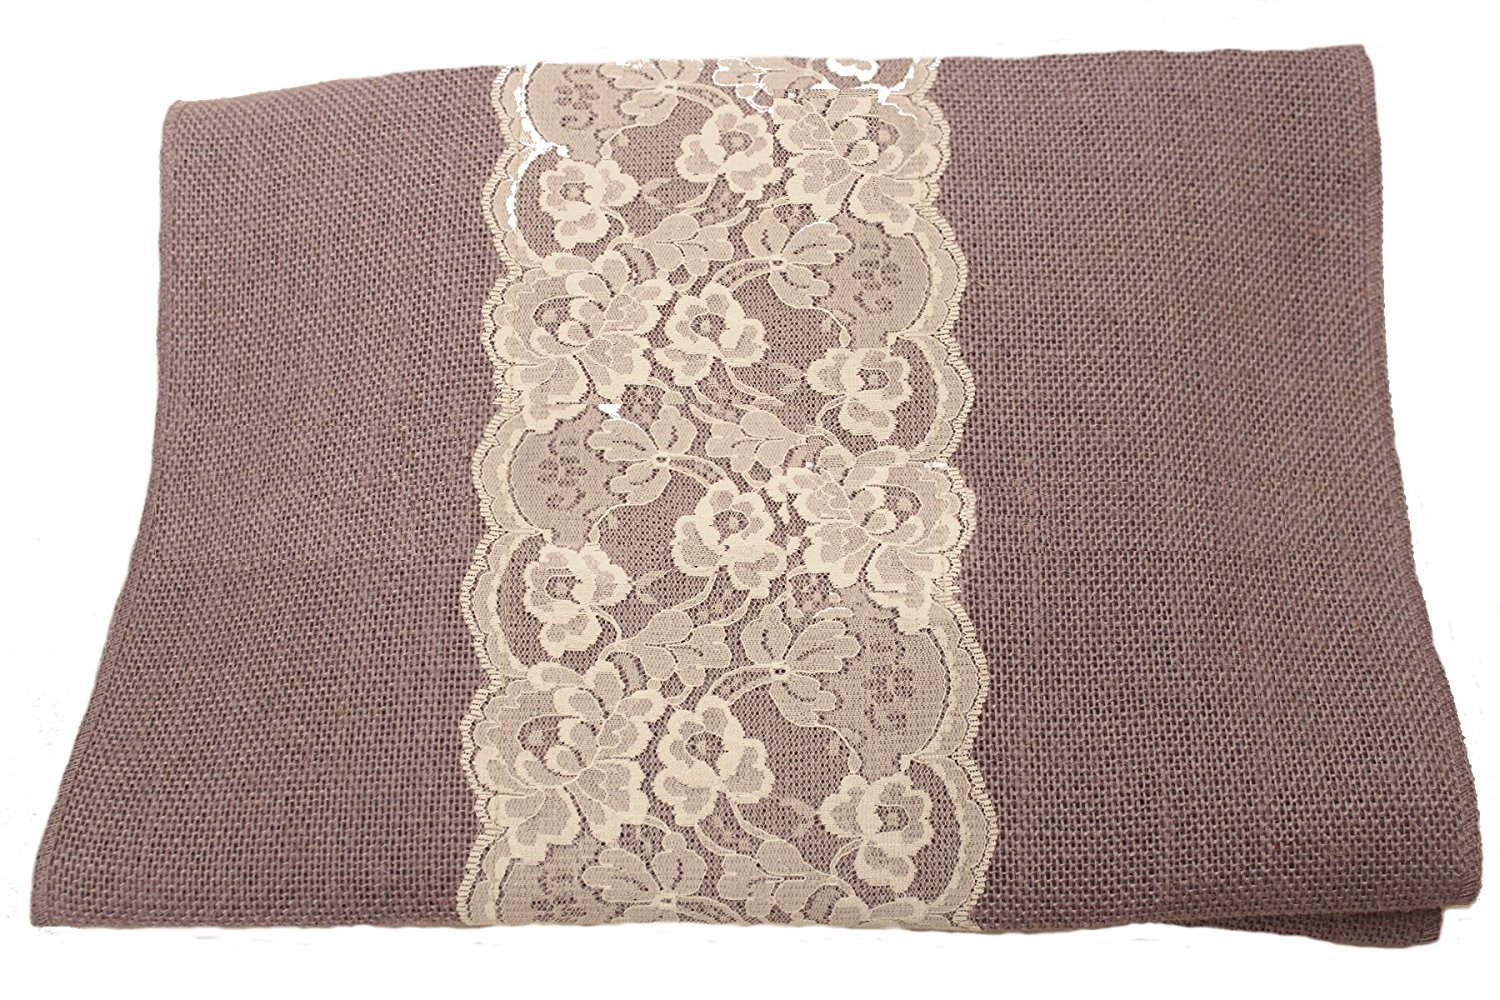 14" Violet Burlap Runner with 6" Ivory Lace